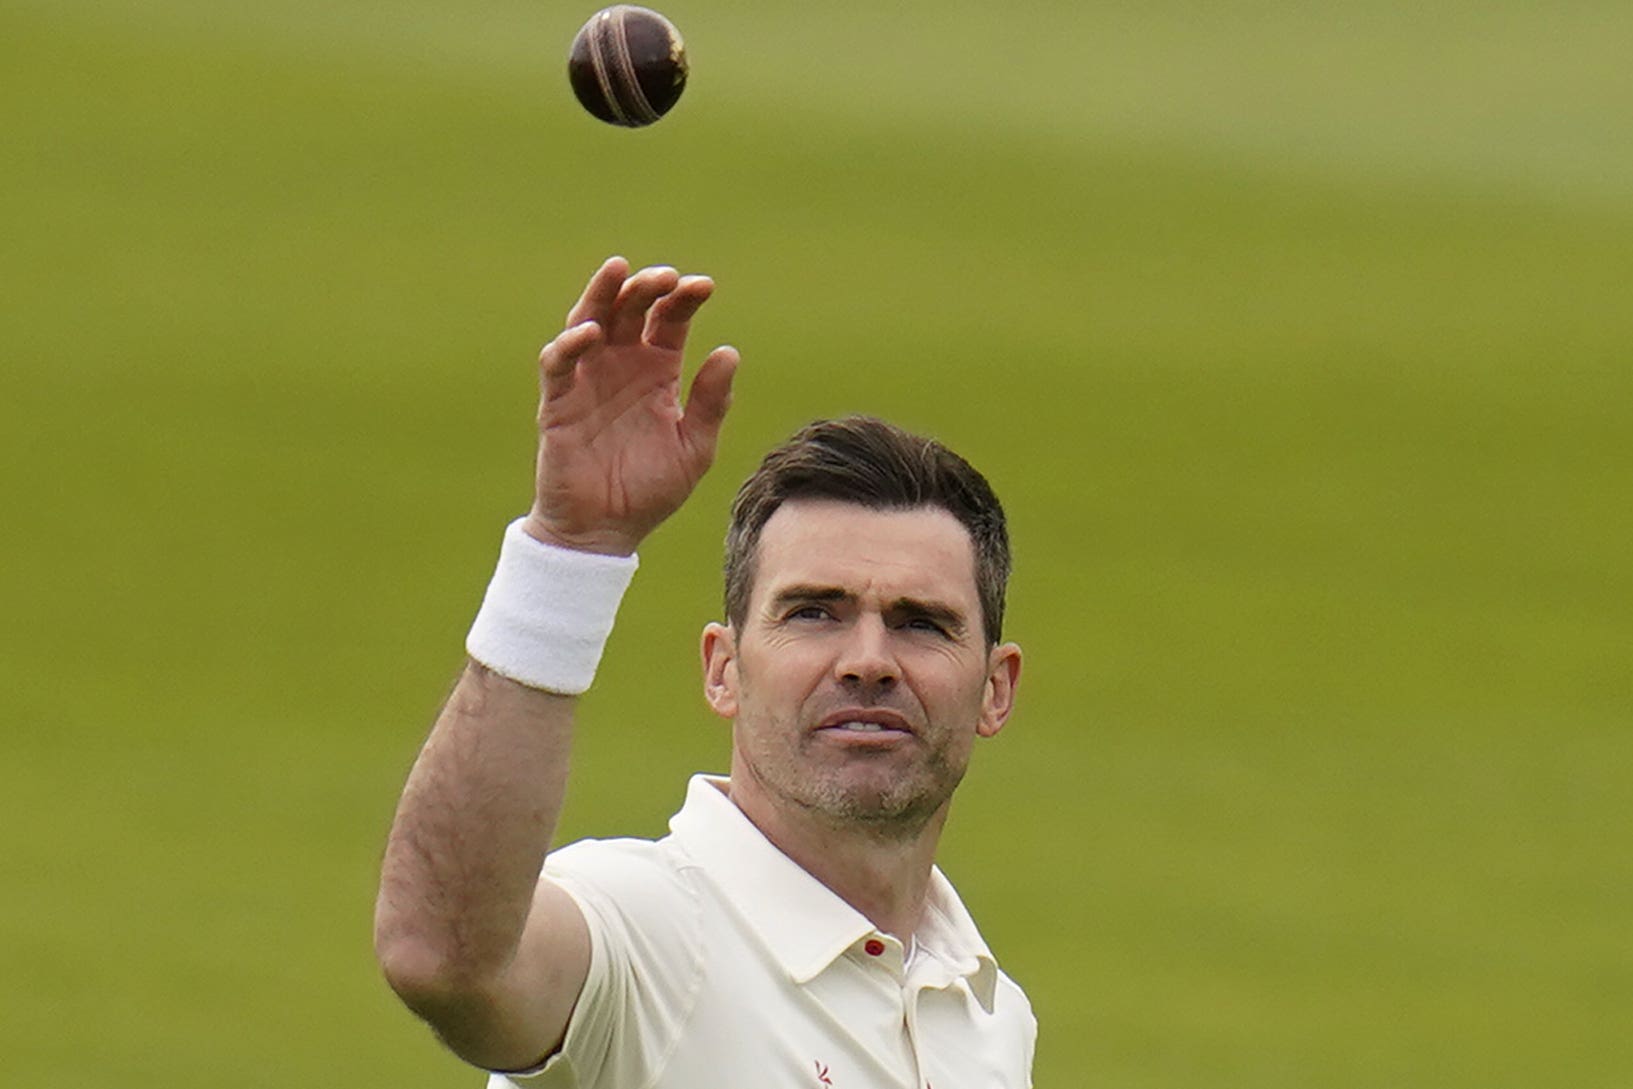 James Anderson experienced a ‘minor issue’ on Lancashire duty (Andrew Matthews/PA)